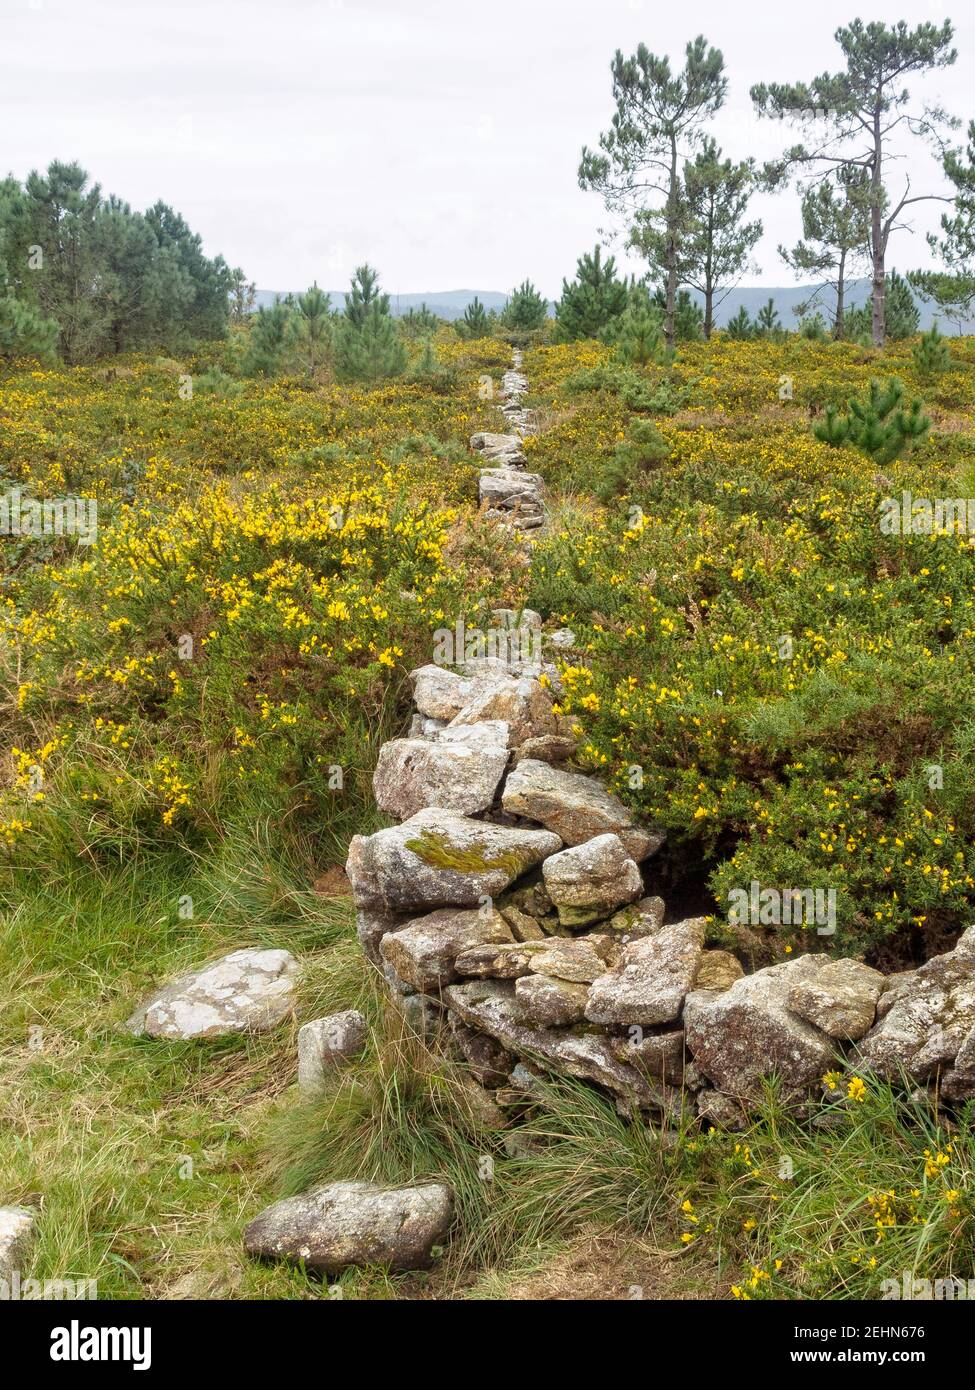 Dry-stone wall surrounded by yellow wildflowers - San Pedro Martir, Galicia, Spain Stock Photo